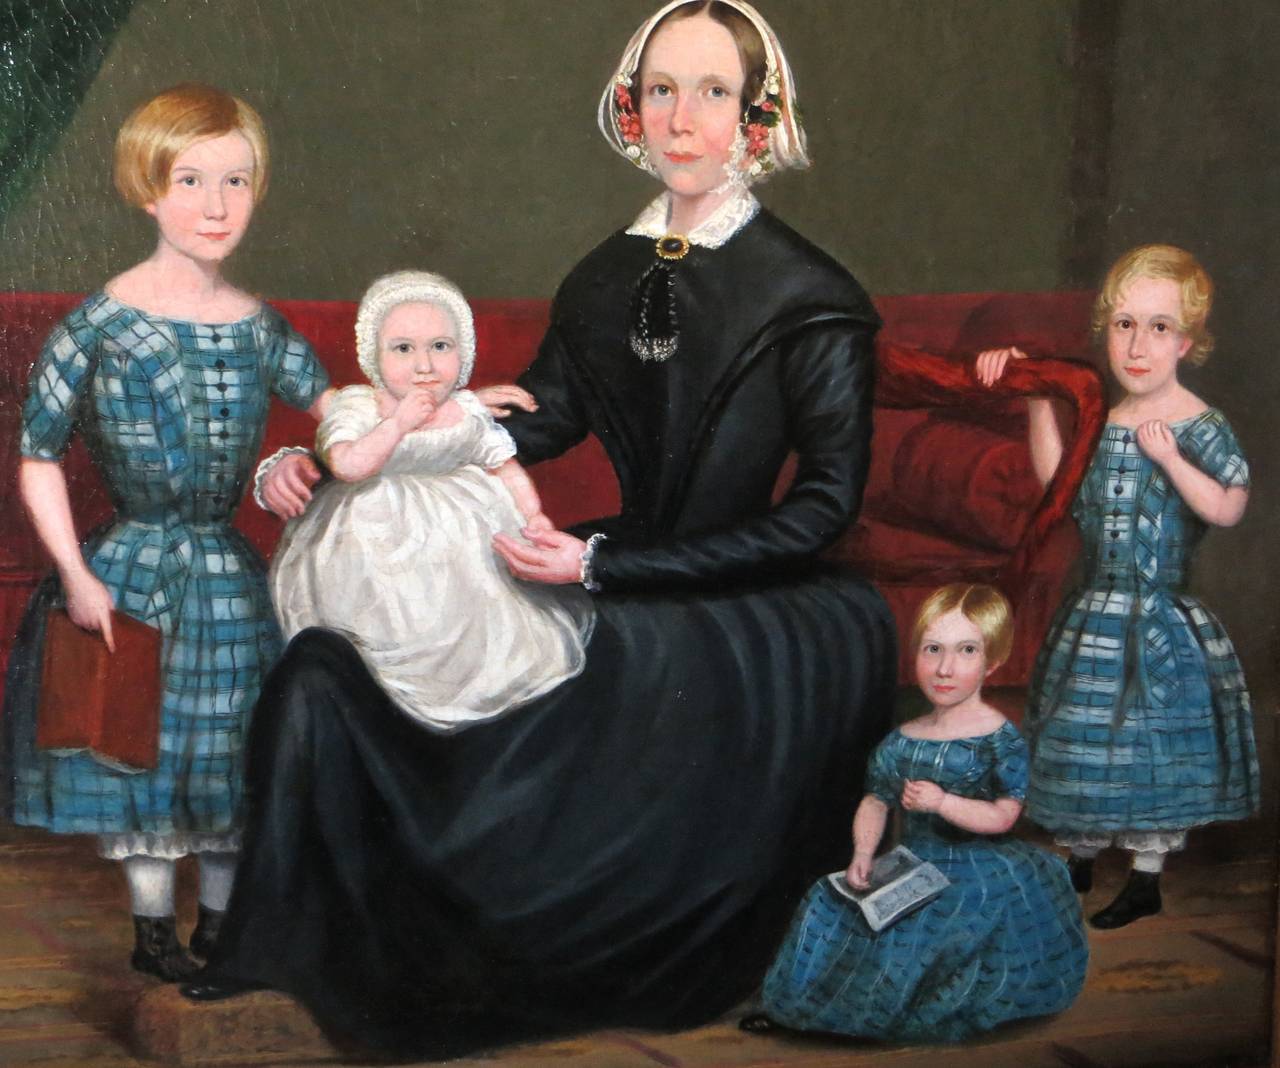 This American portrait descended through same family from 1830s until July 2012, when I acquired it from executor in Oregon. Early family had lived in New England. It is unusual to have so many subjects in the same picture, especially to have four